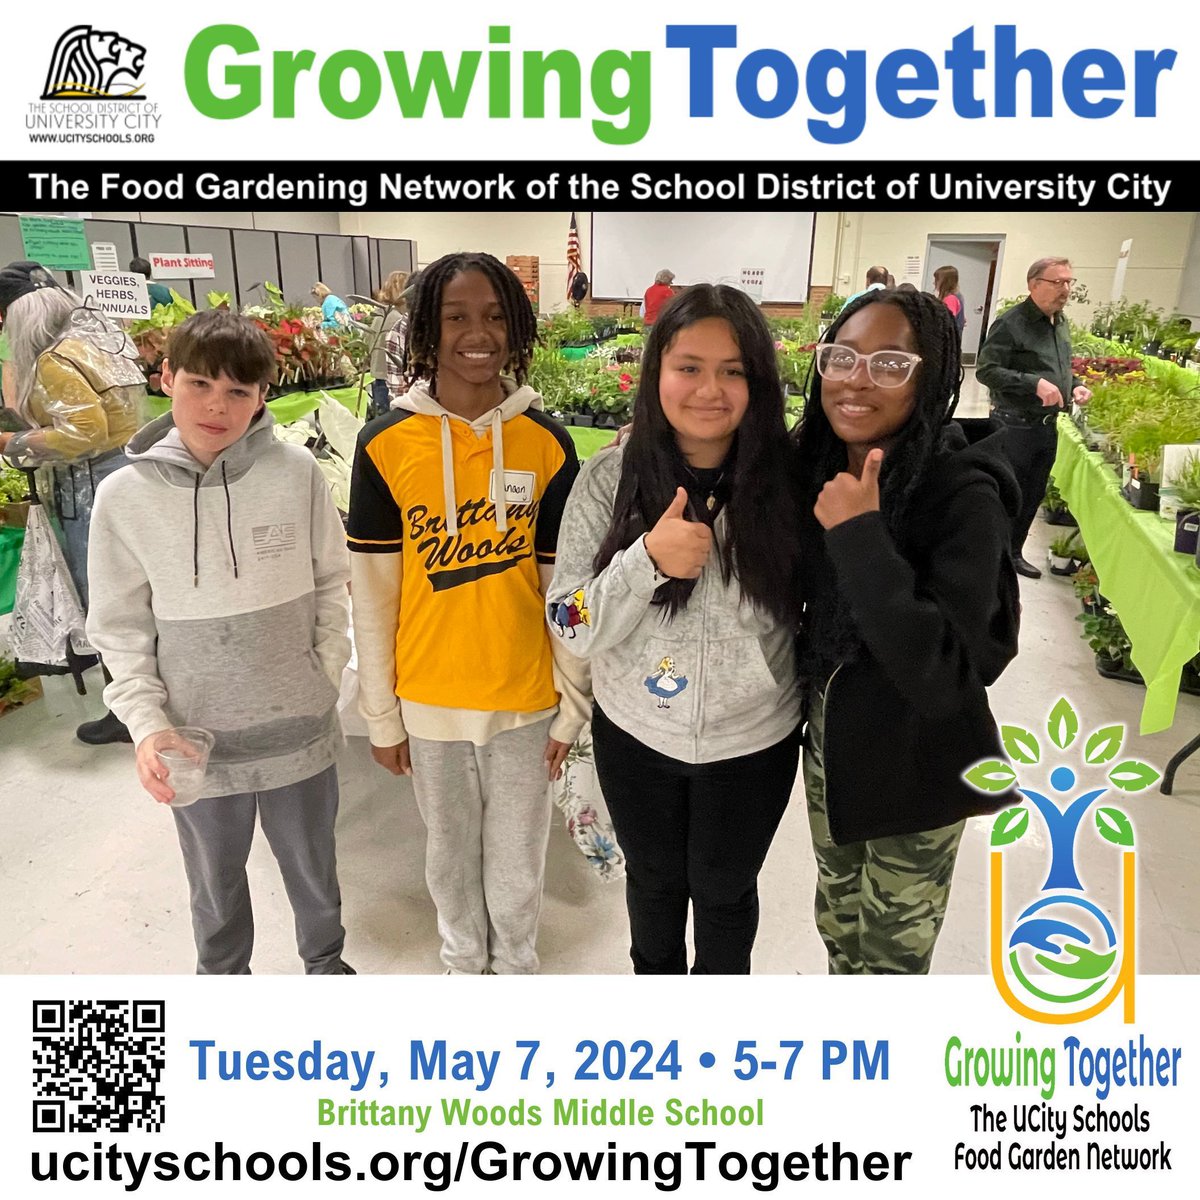 Brittany Woods Middle School students promote their gardening program and May 7 Growing Together event during U. City in Bloom’s Plant Sale preview night. 🌿 Learn more at ucityschools.org/GrowingTogether. #CommunityGardens #GreenRibbonSchoolsAwardee @UCSharonica @UCLearns